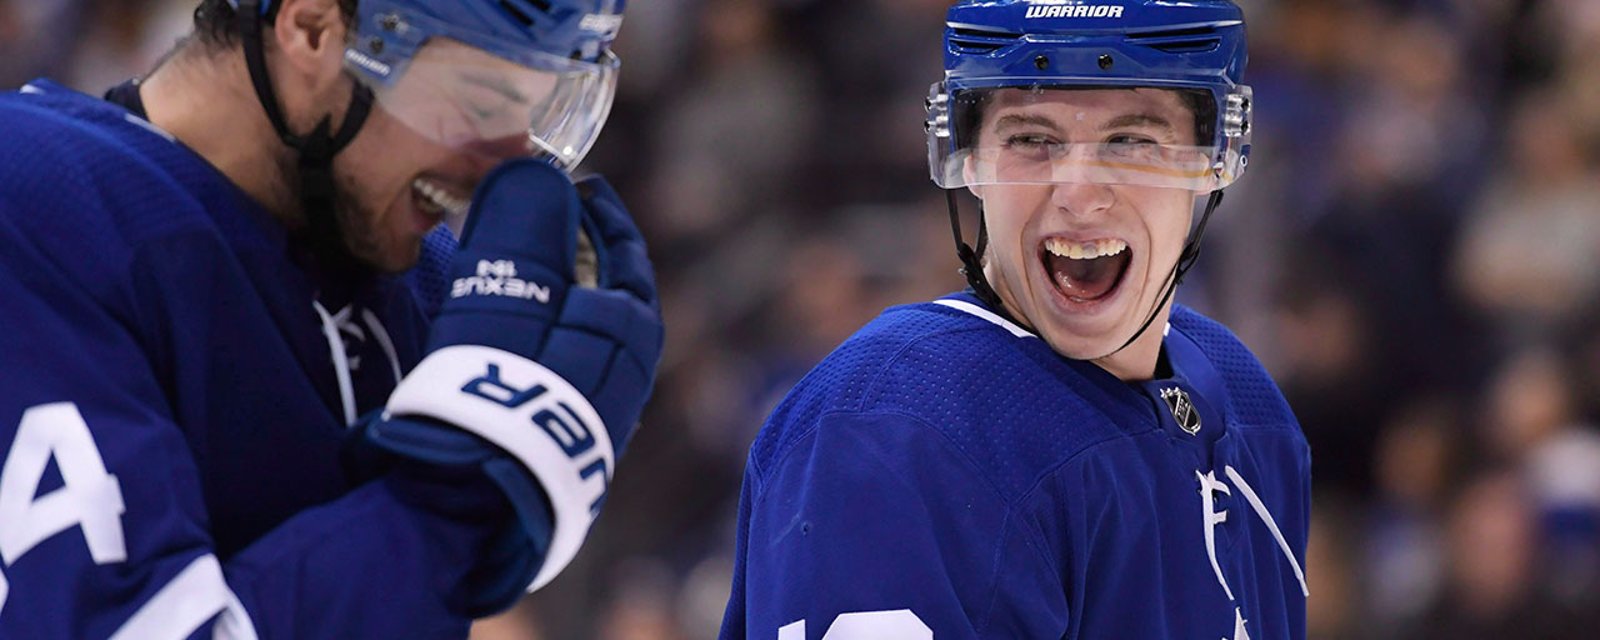 Breaking: Marner agrees to new deal with Leafs! 